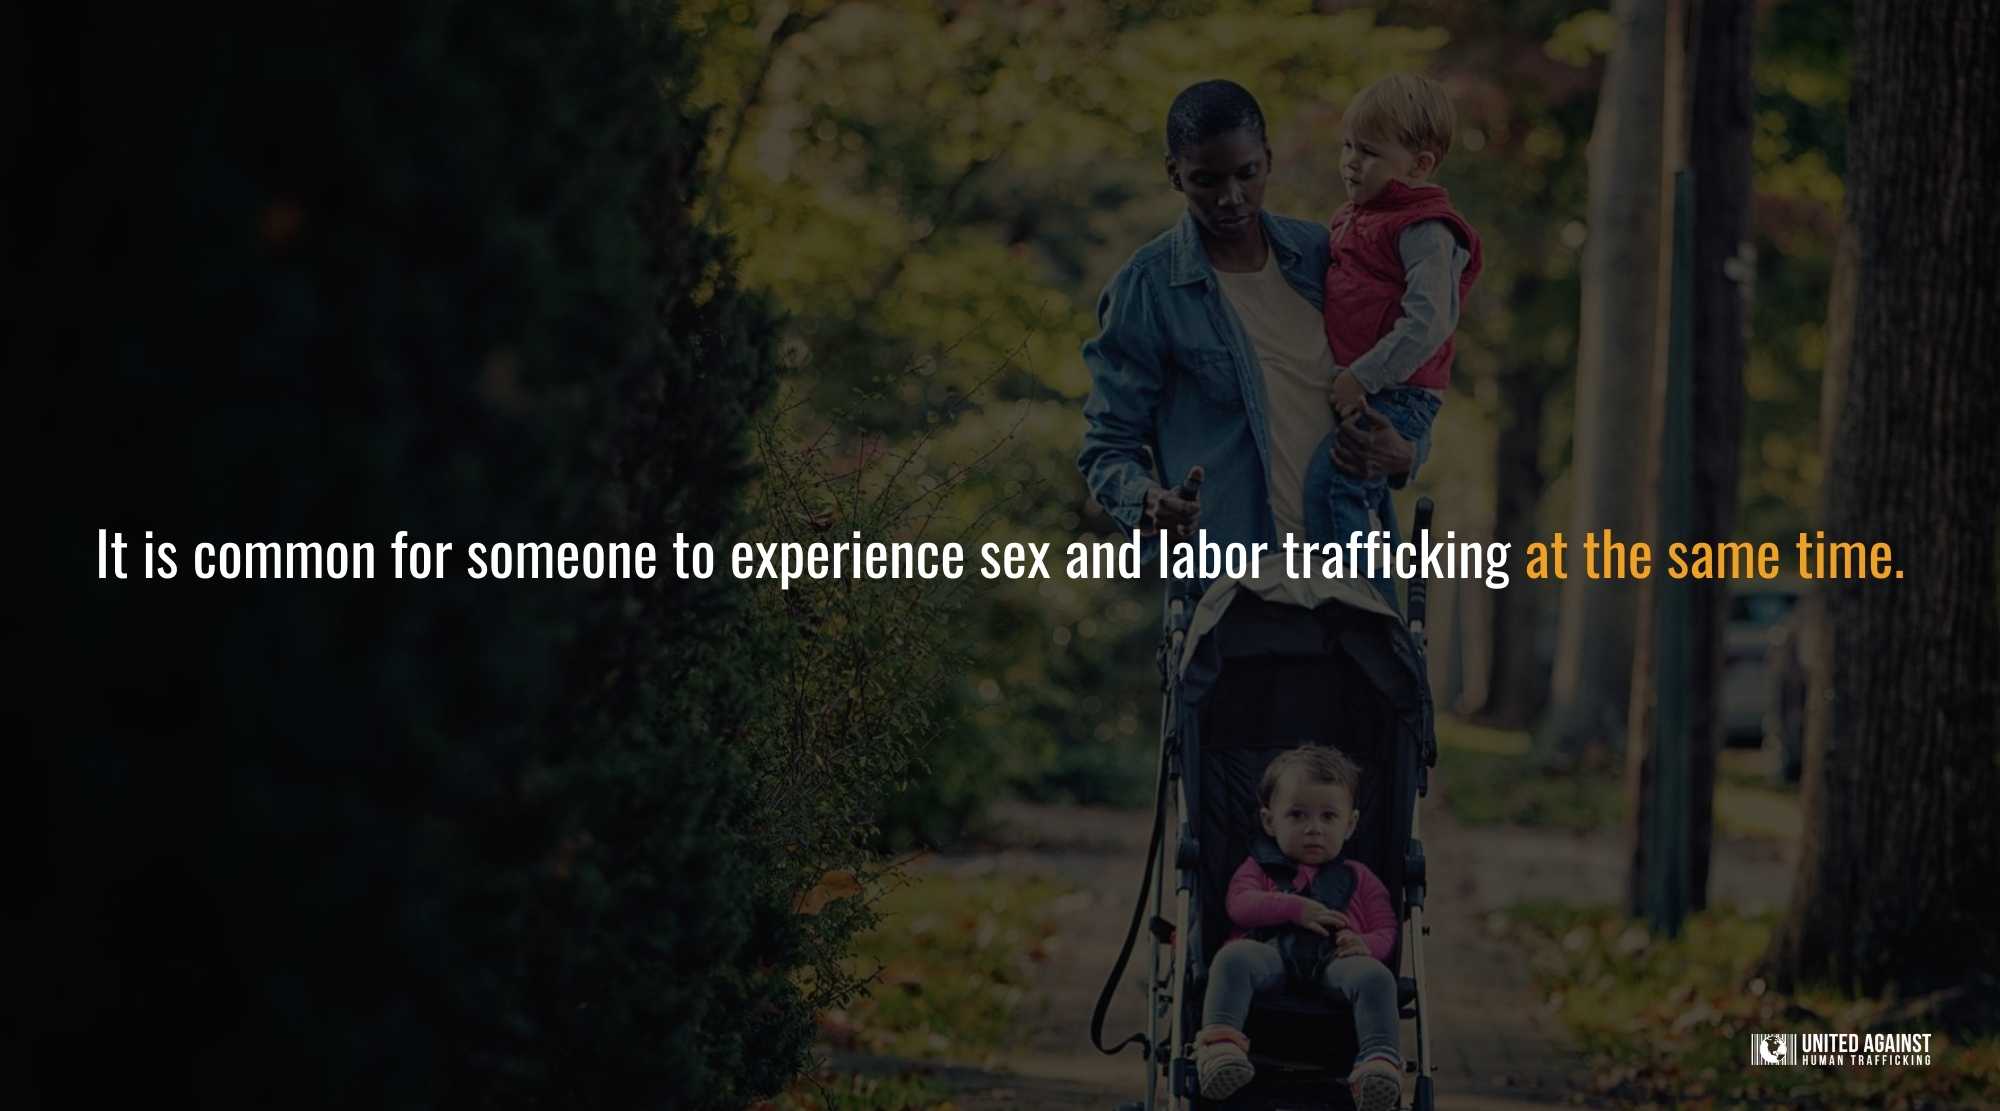 It is common for someone to experience sex and labor trafficking at the same time